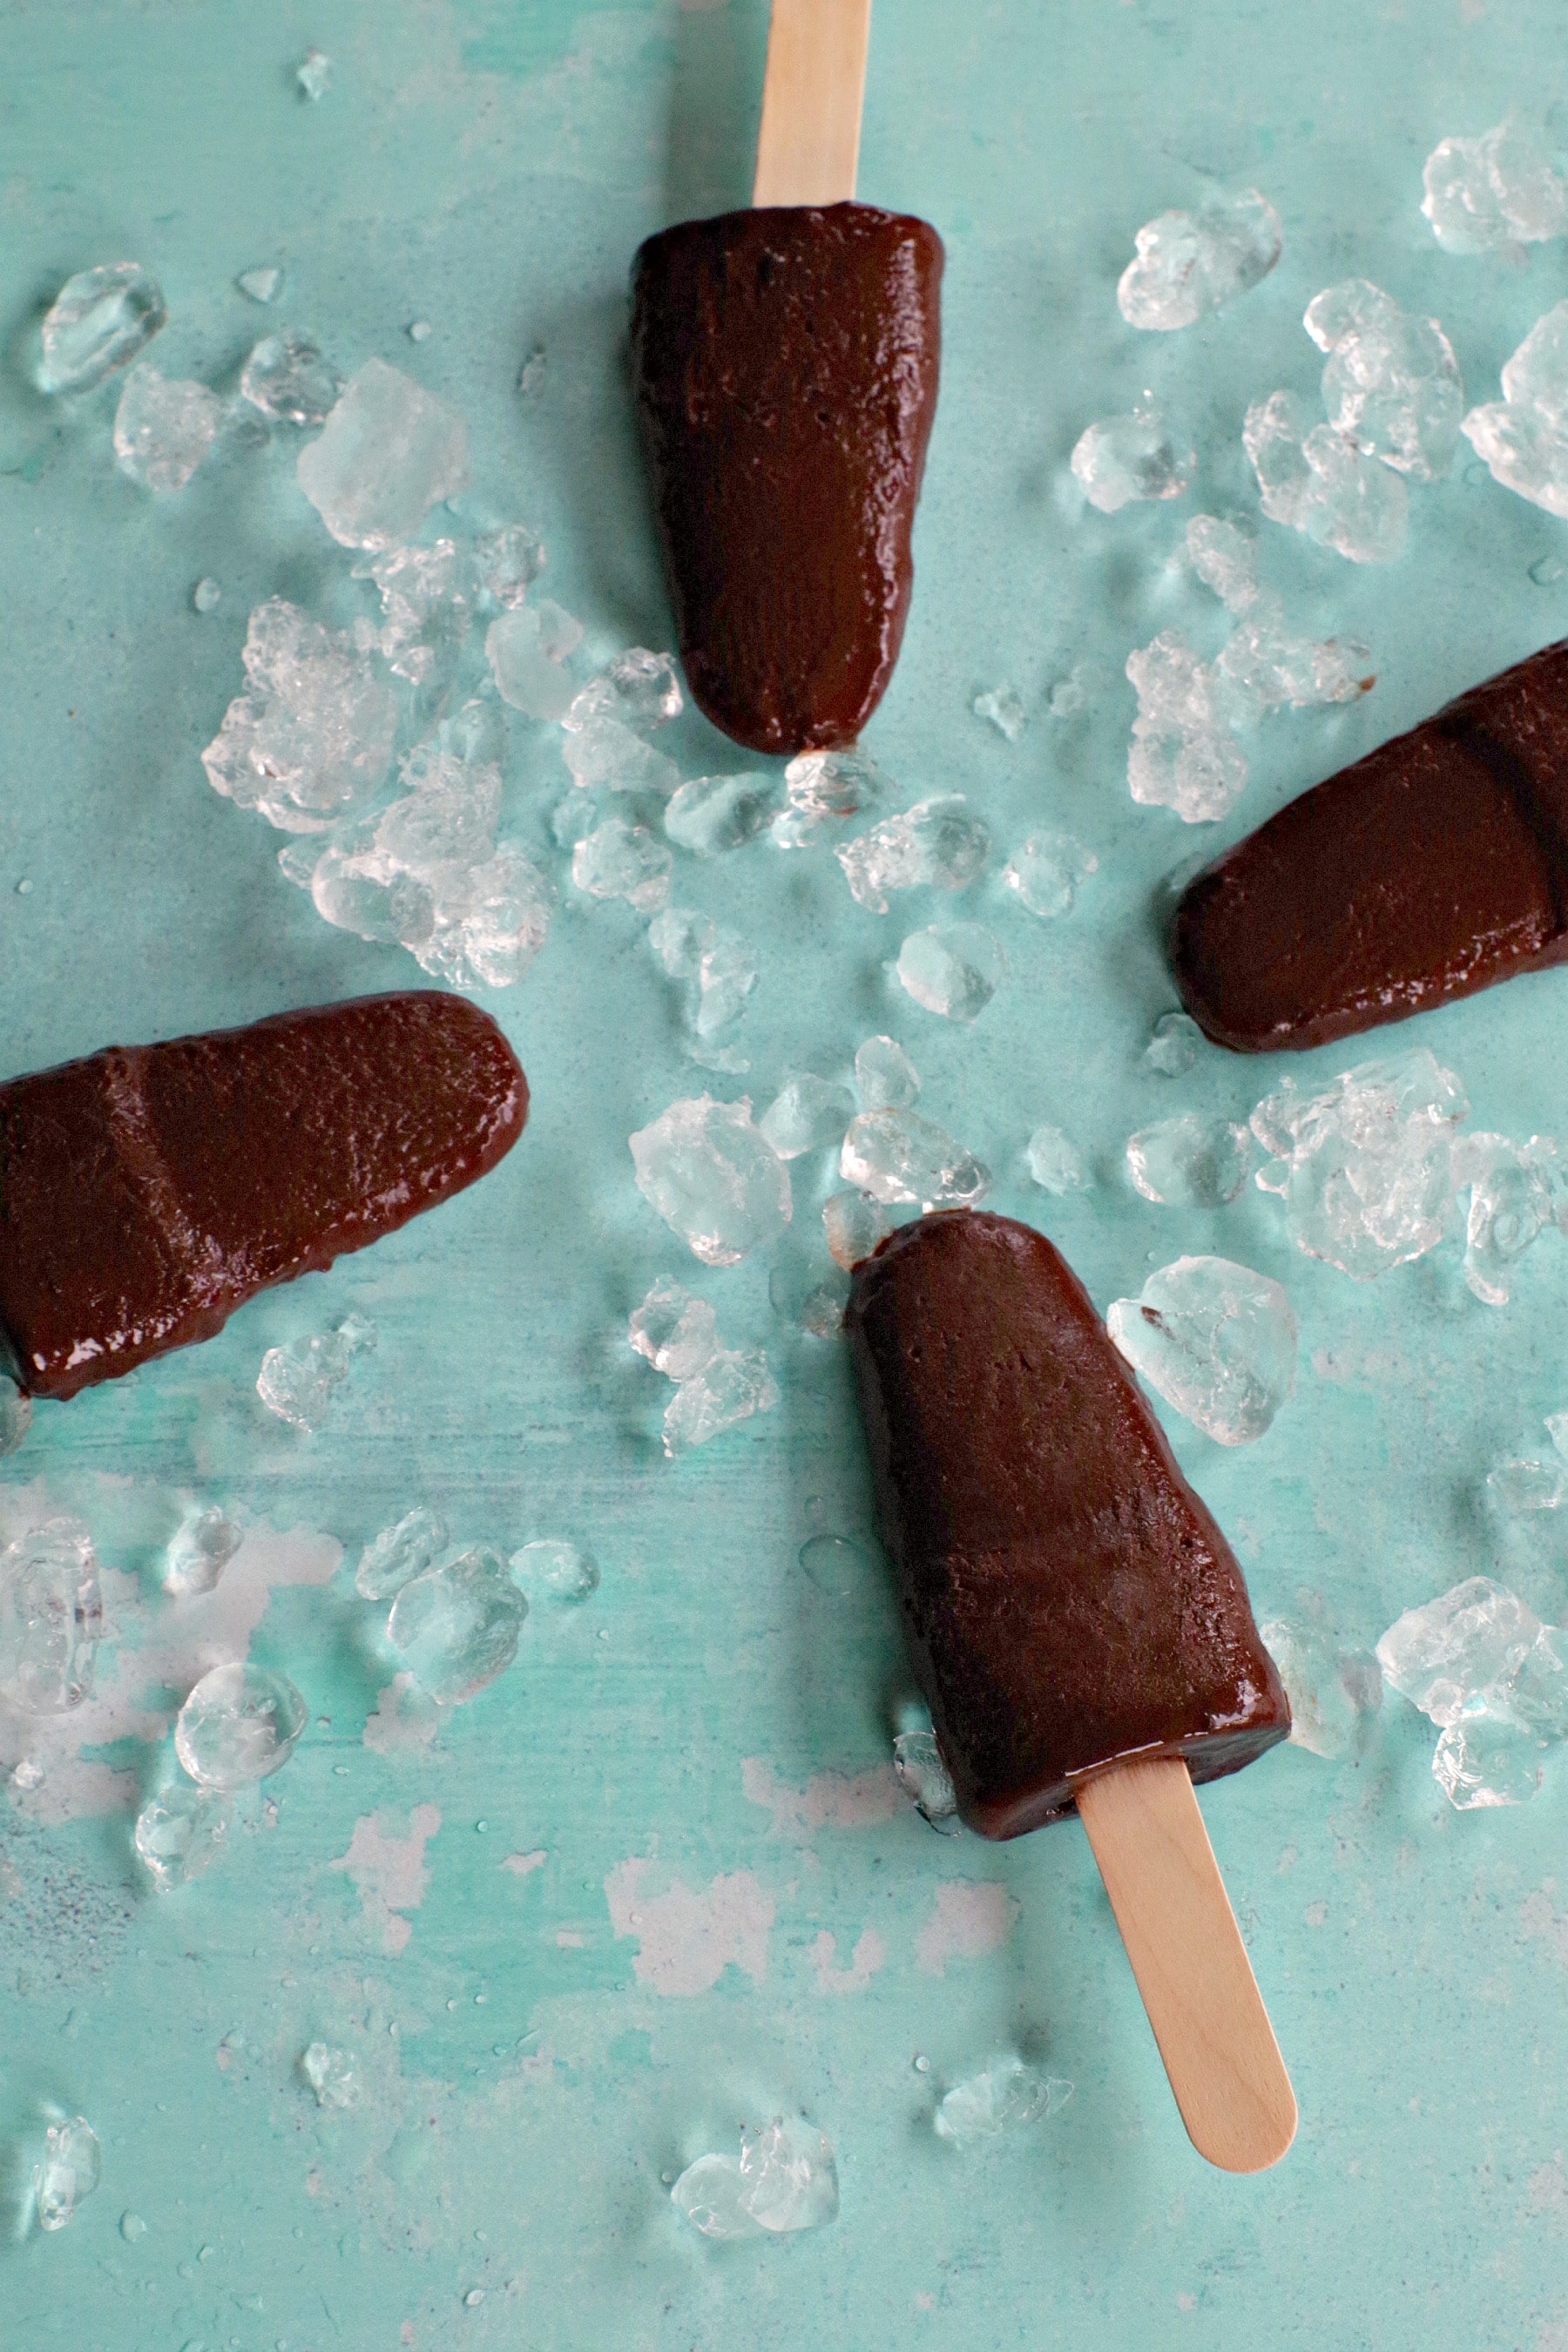 4 chocolate banana popsicles on blue background with ice